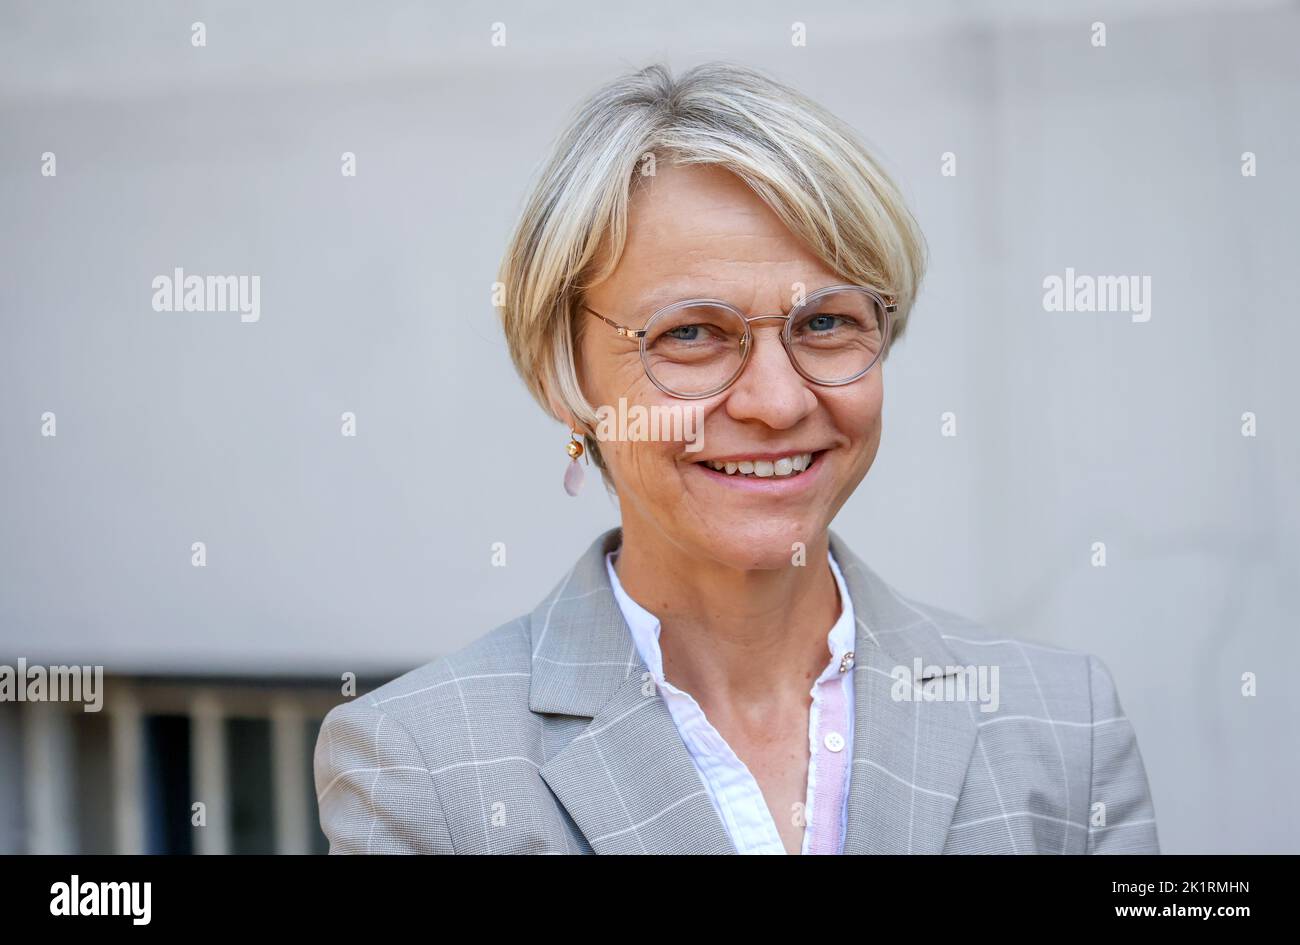 Duisburg, North Rhine-Westphalia, Germany - Dorothee Feller, Minister for Schools and Education of the State of North Rhine-Westphalia, NRW School Min Stock Photo